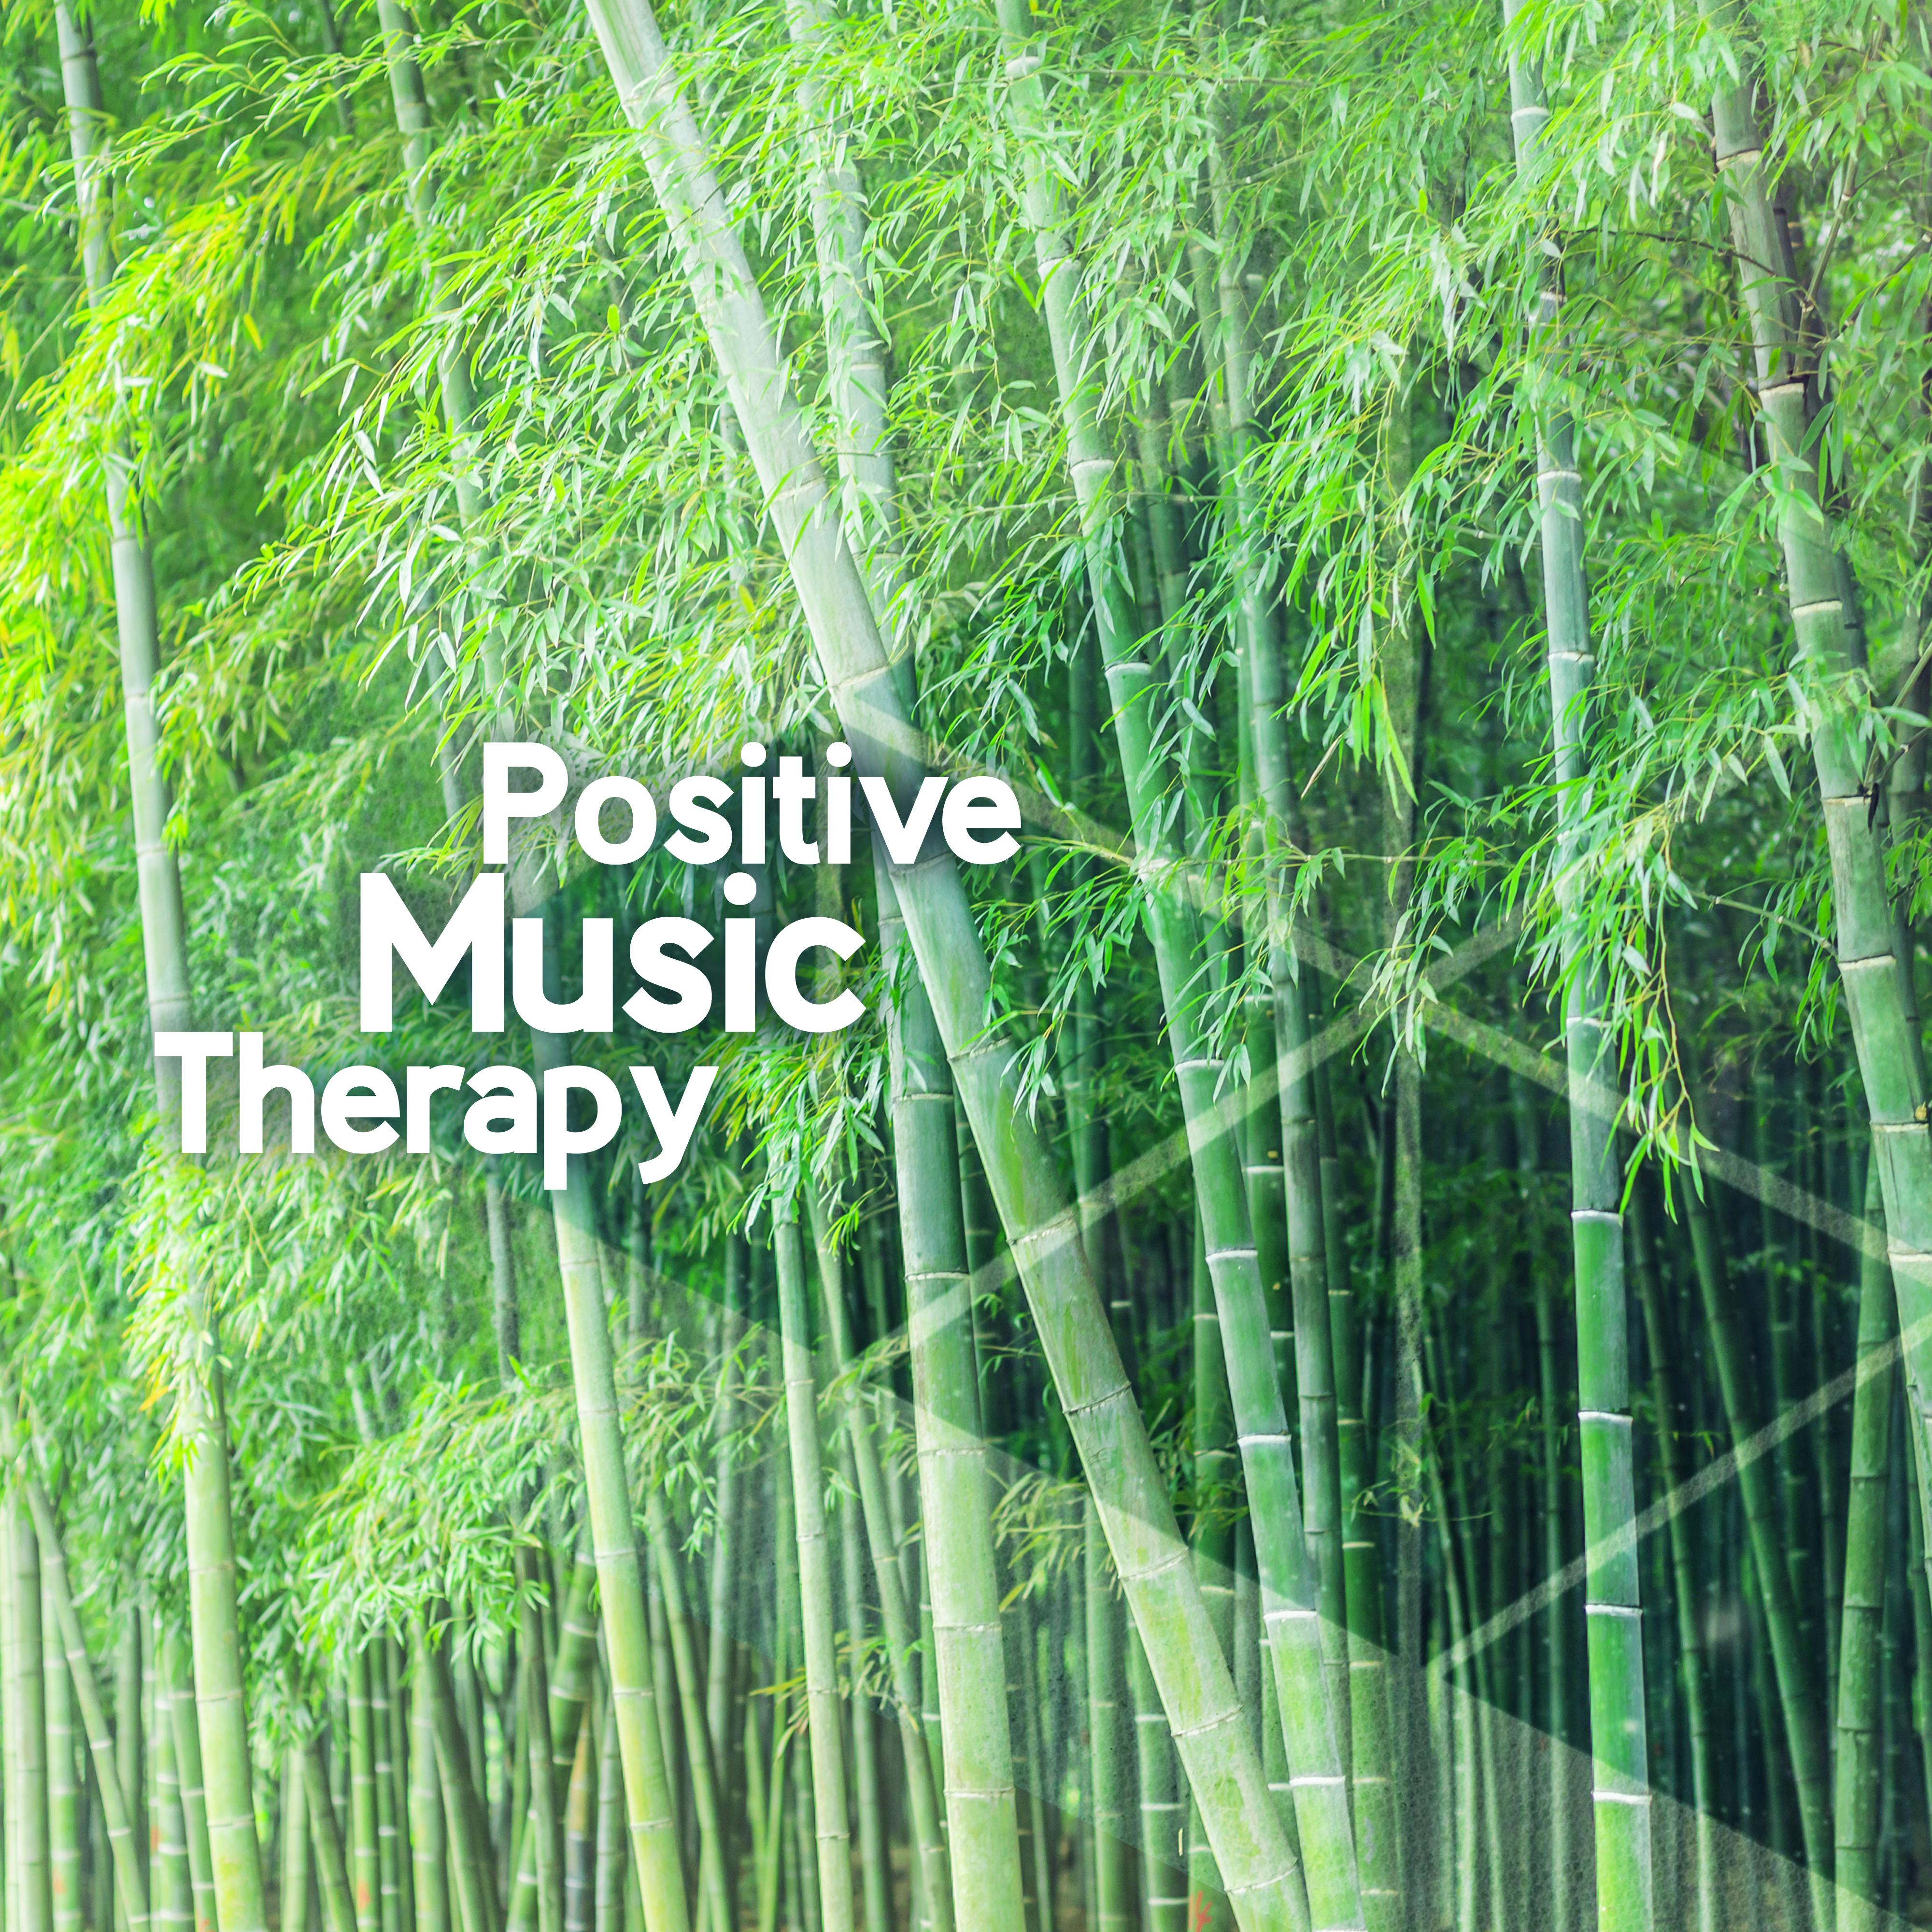 Positive Music Therapy